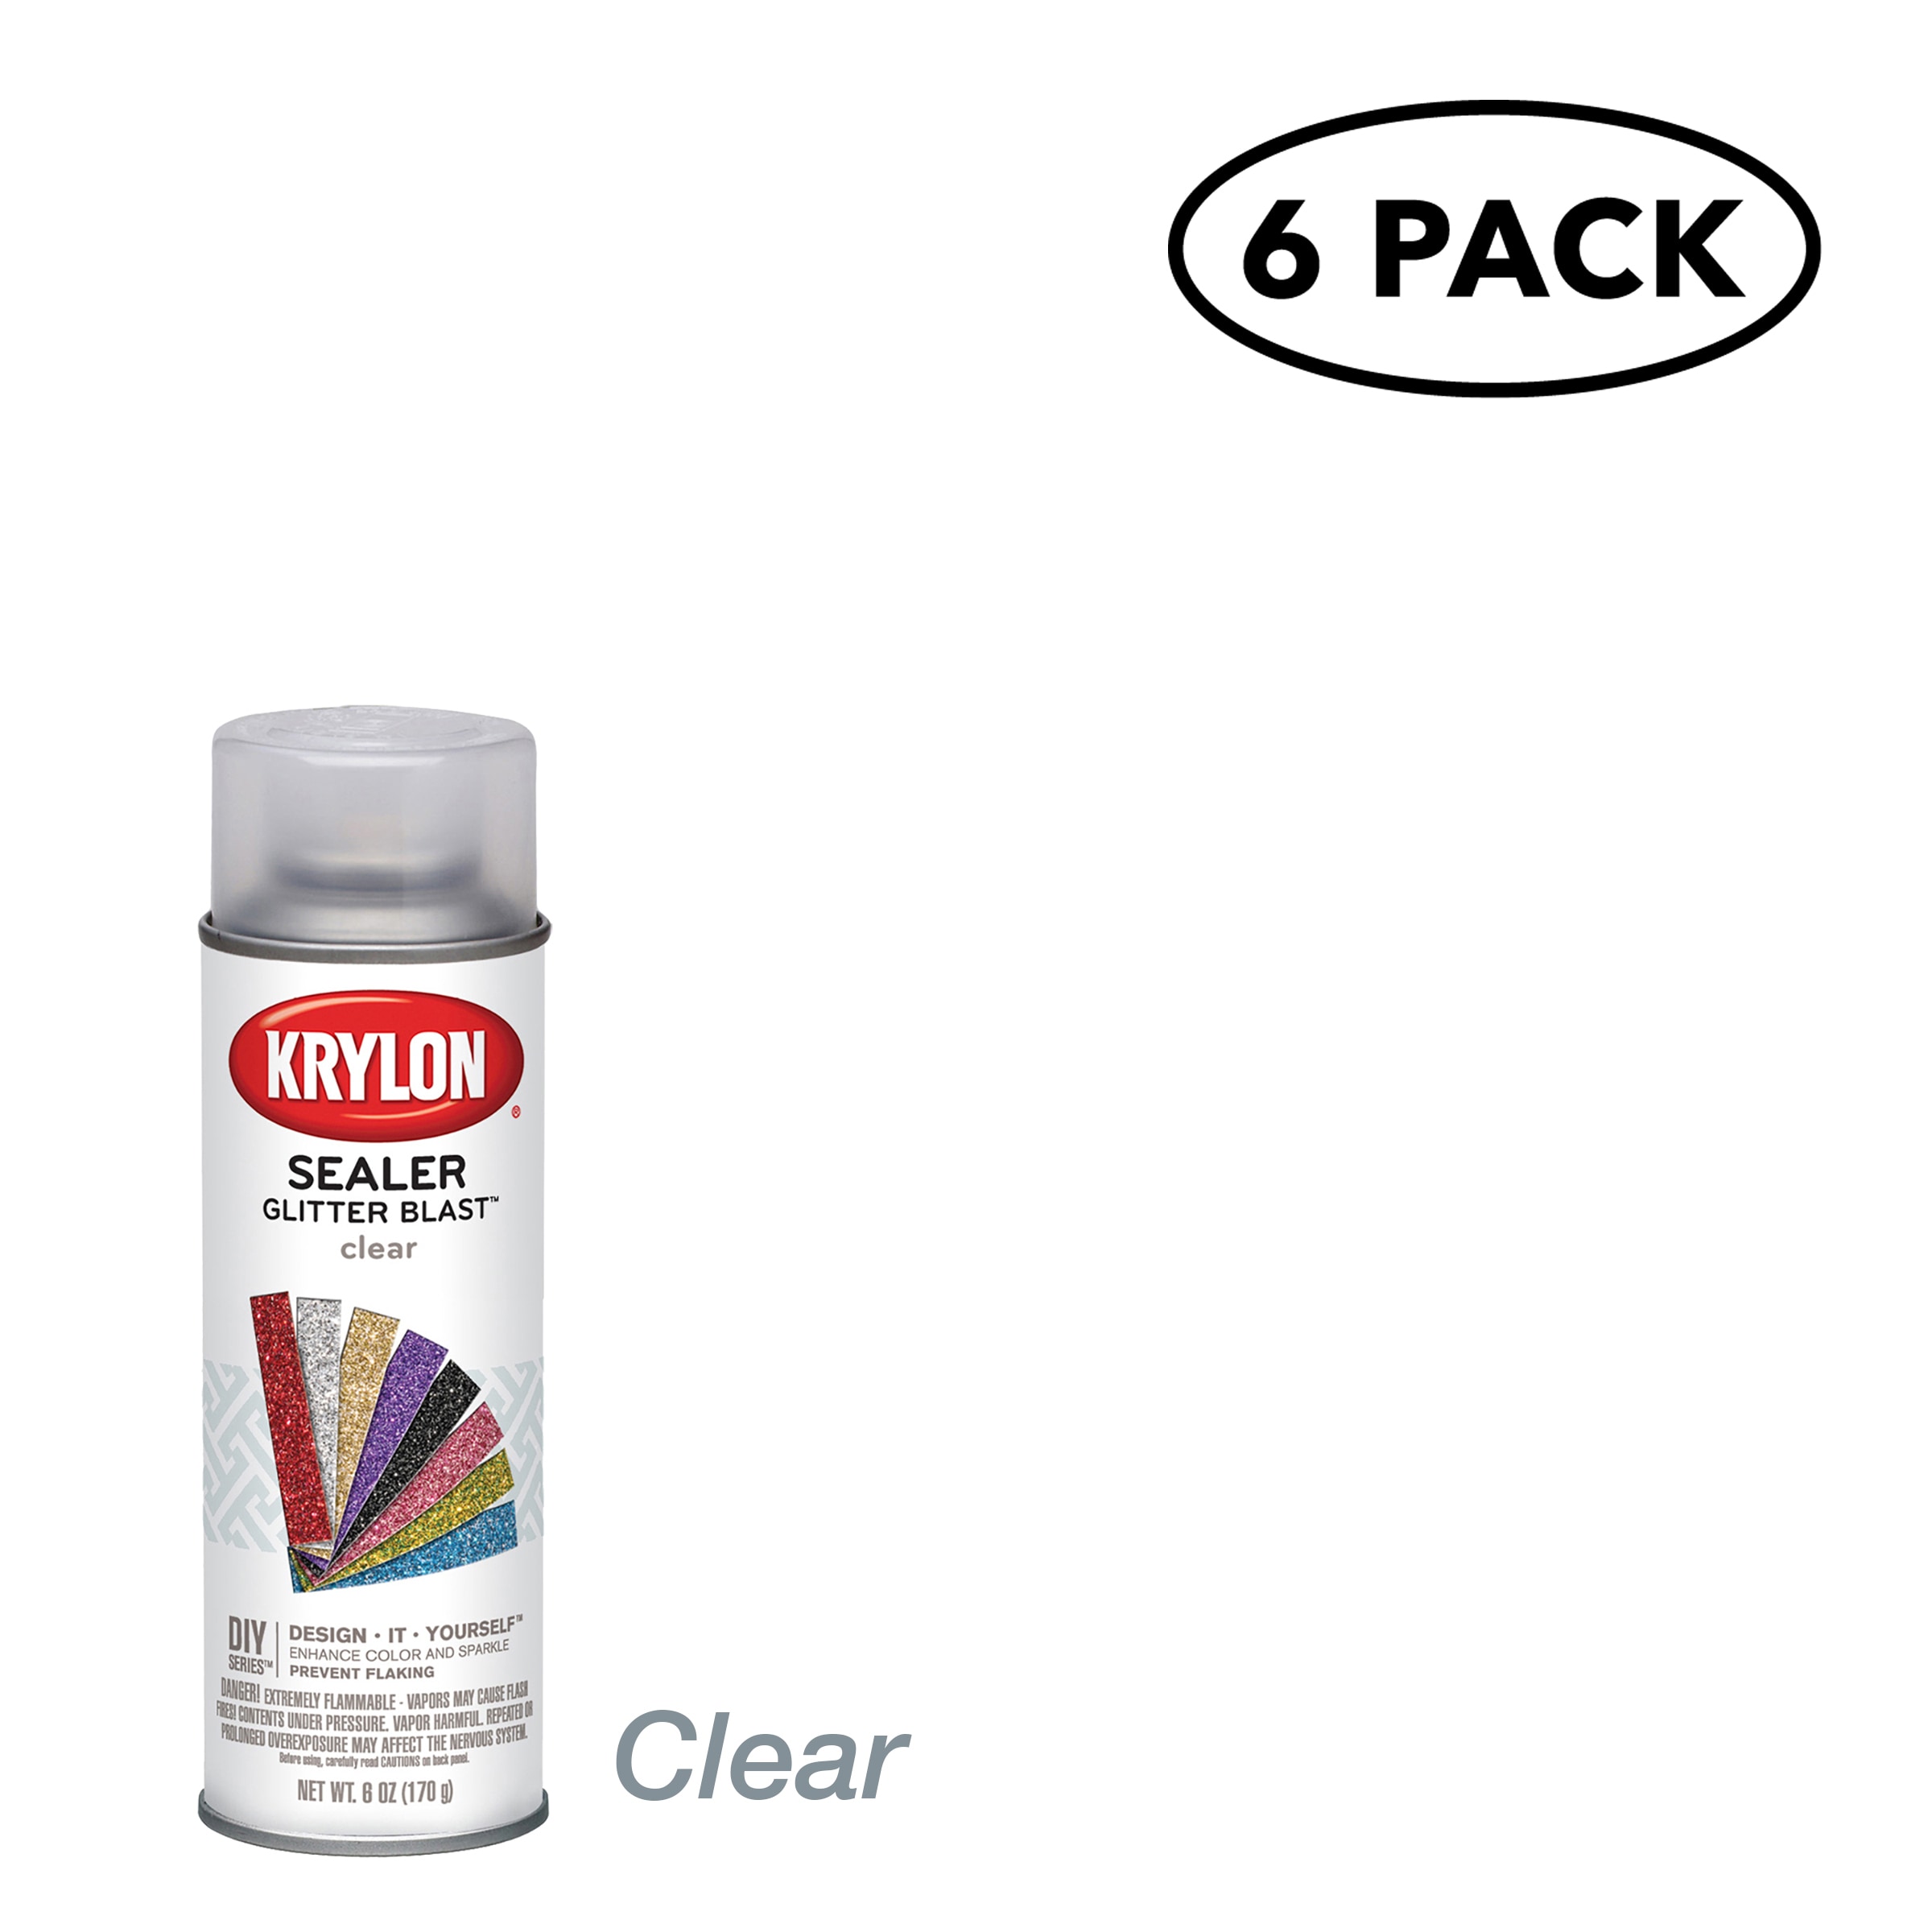 Rust-Oleum Specialty Glitter Silver Spray Paint 10.25 oz - PaintPlace New  York